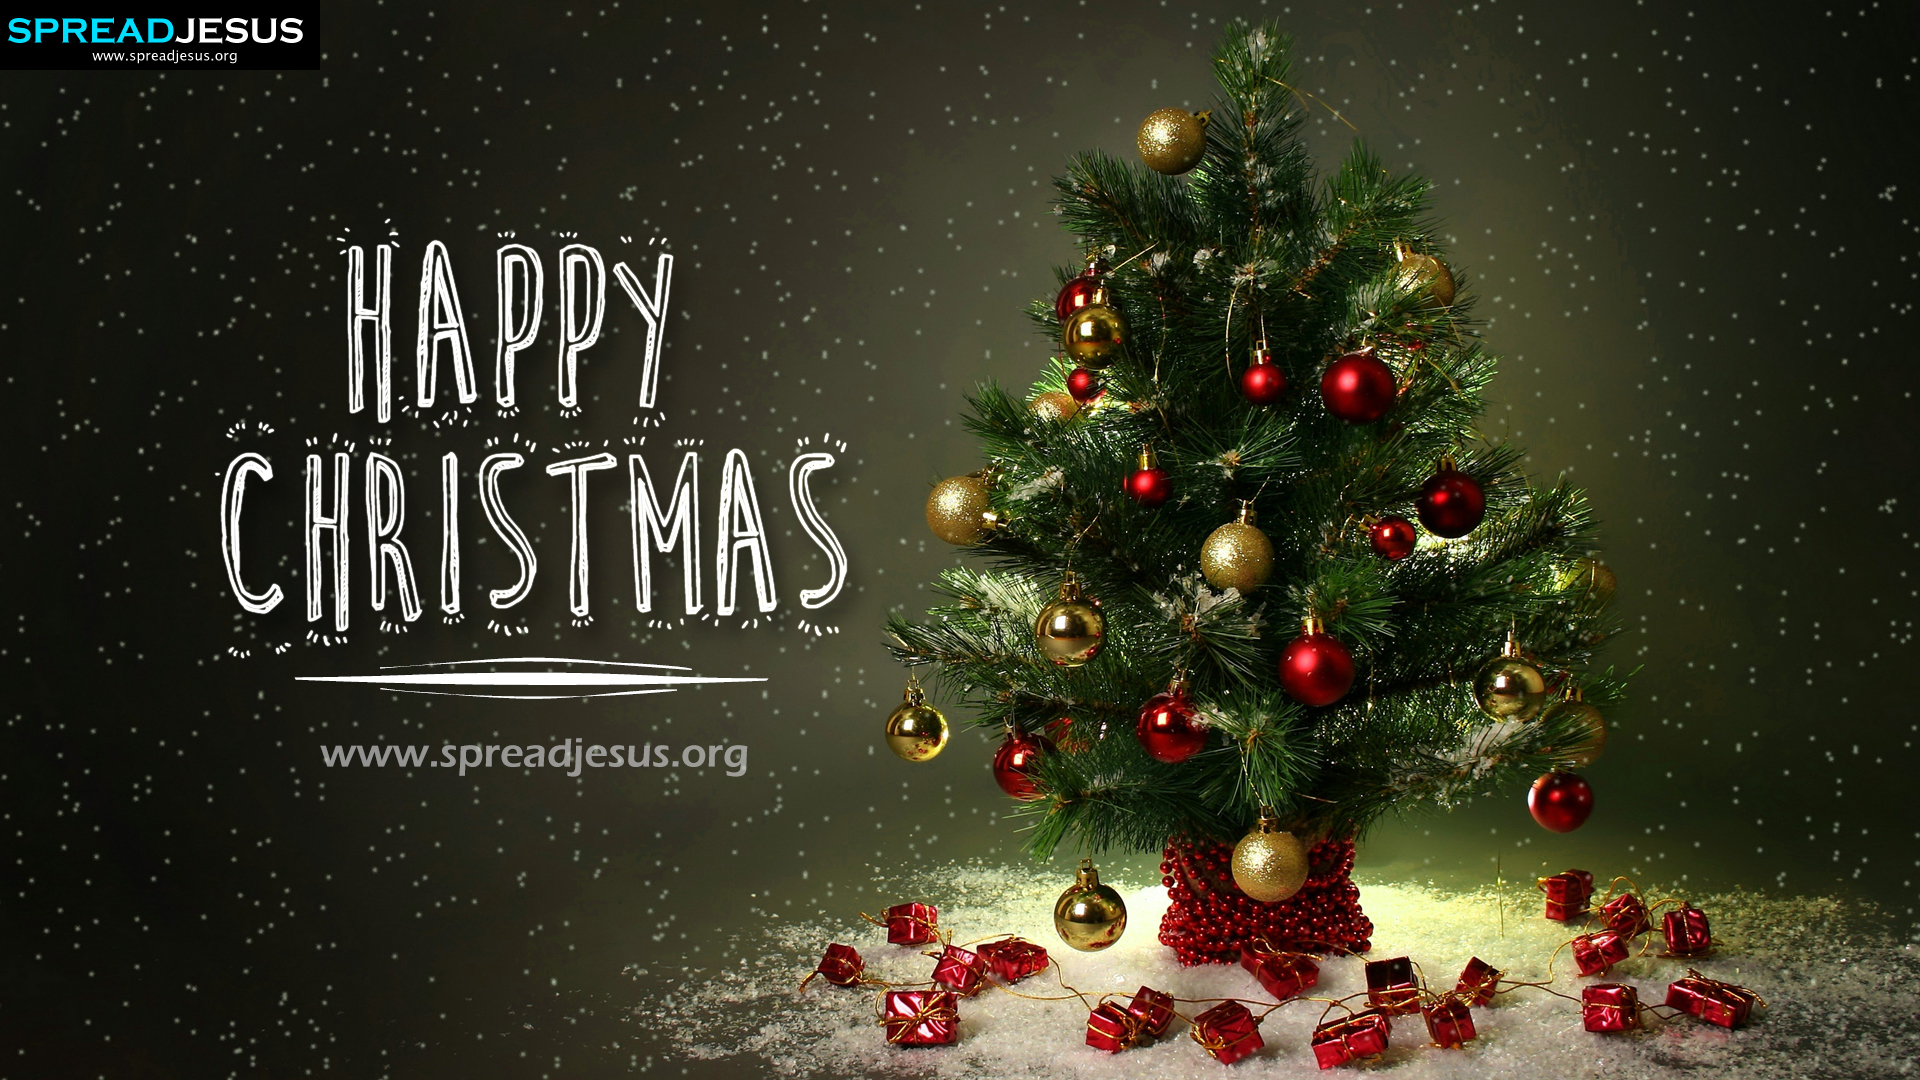 101+ Advance Merry Christmas Images 2021 Hd Download